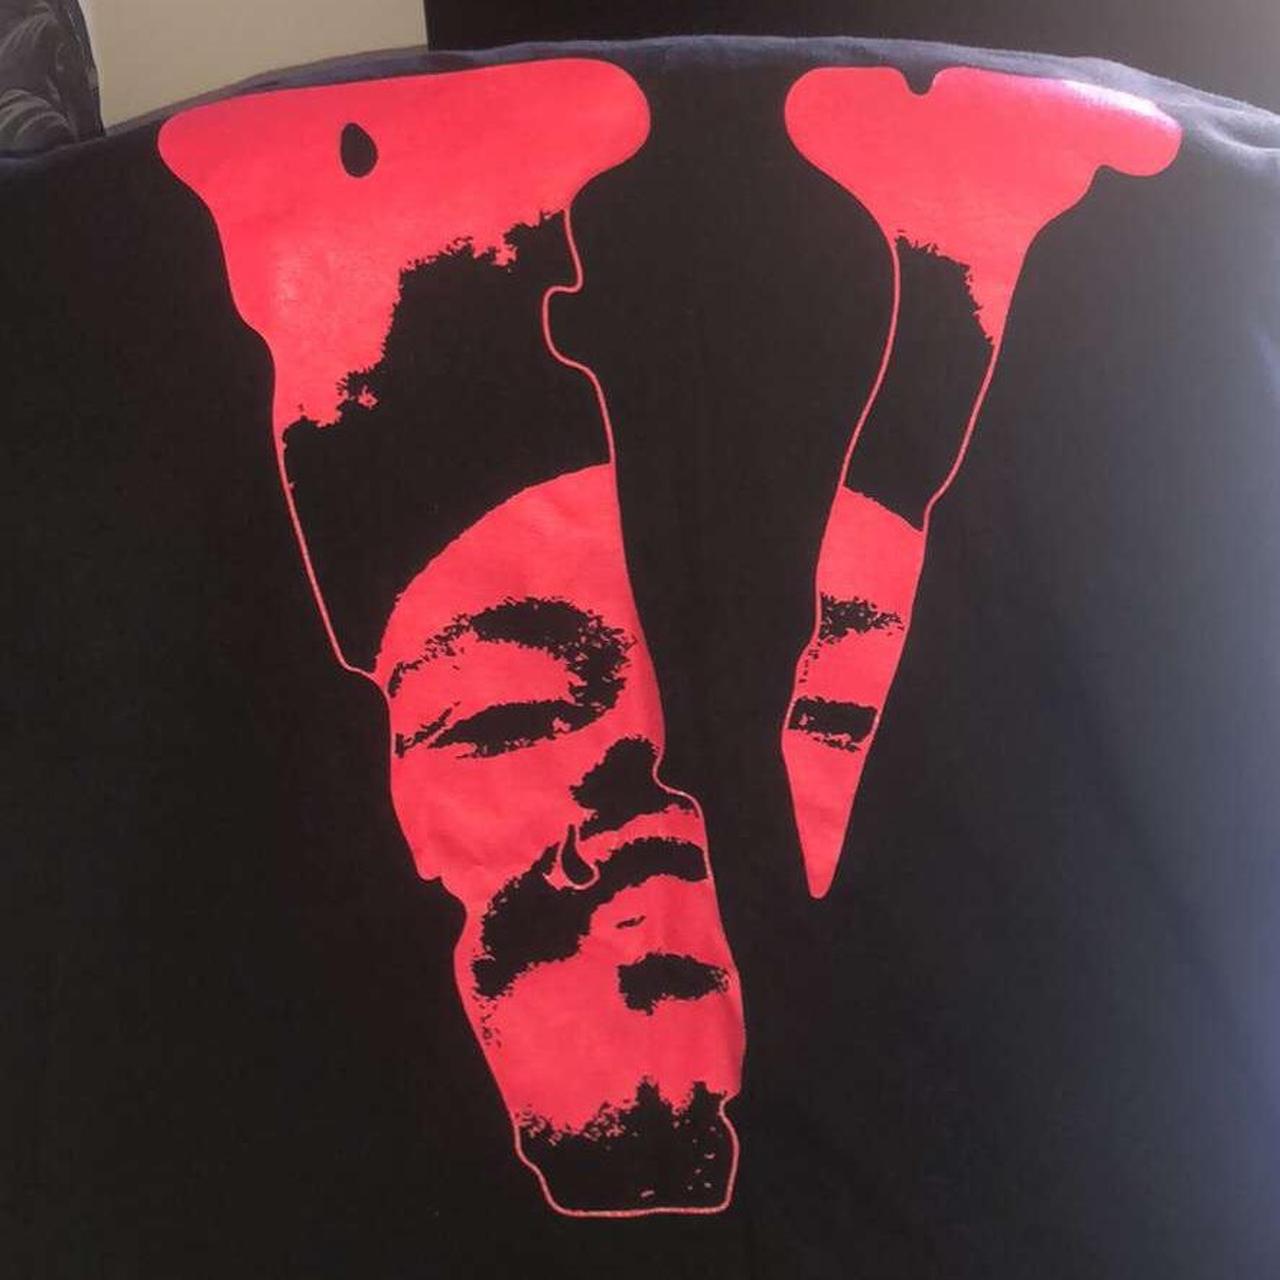 The Weeknd x Vlone After Hours Blood Drip Tee BlackThe Weeknd x